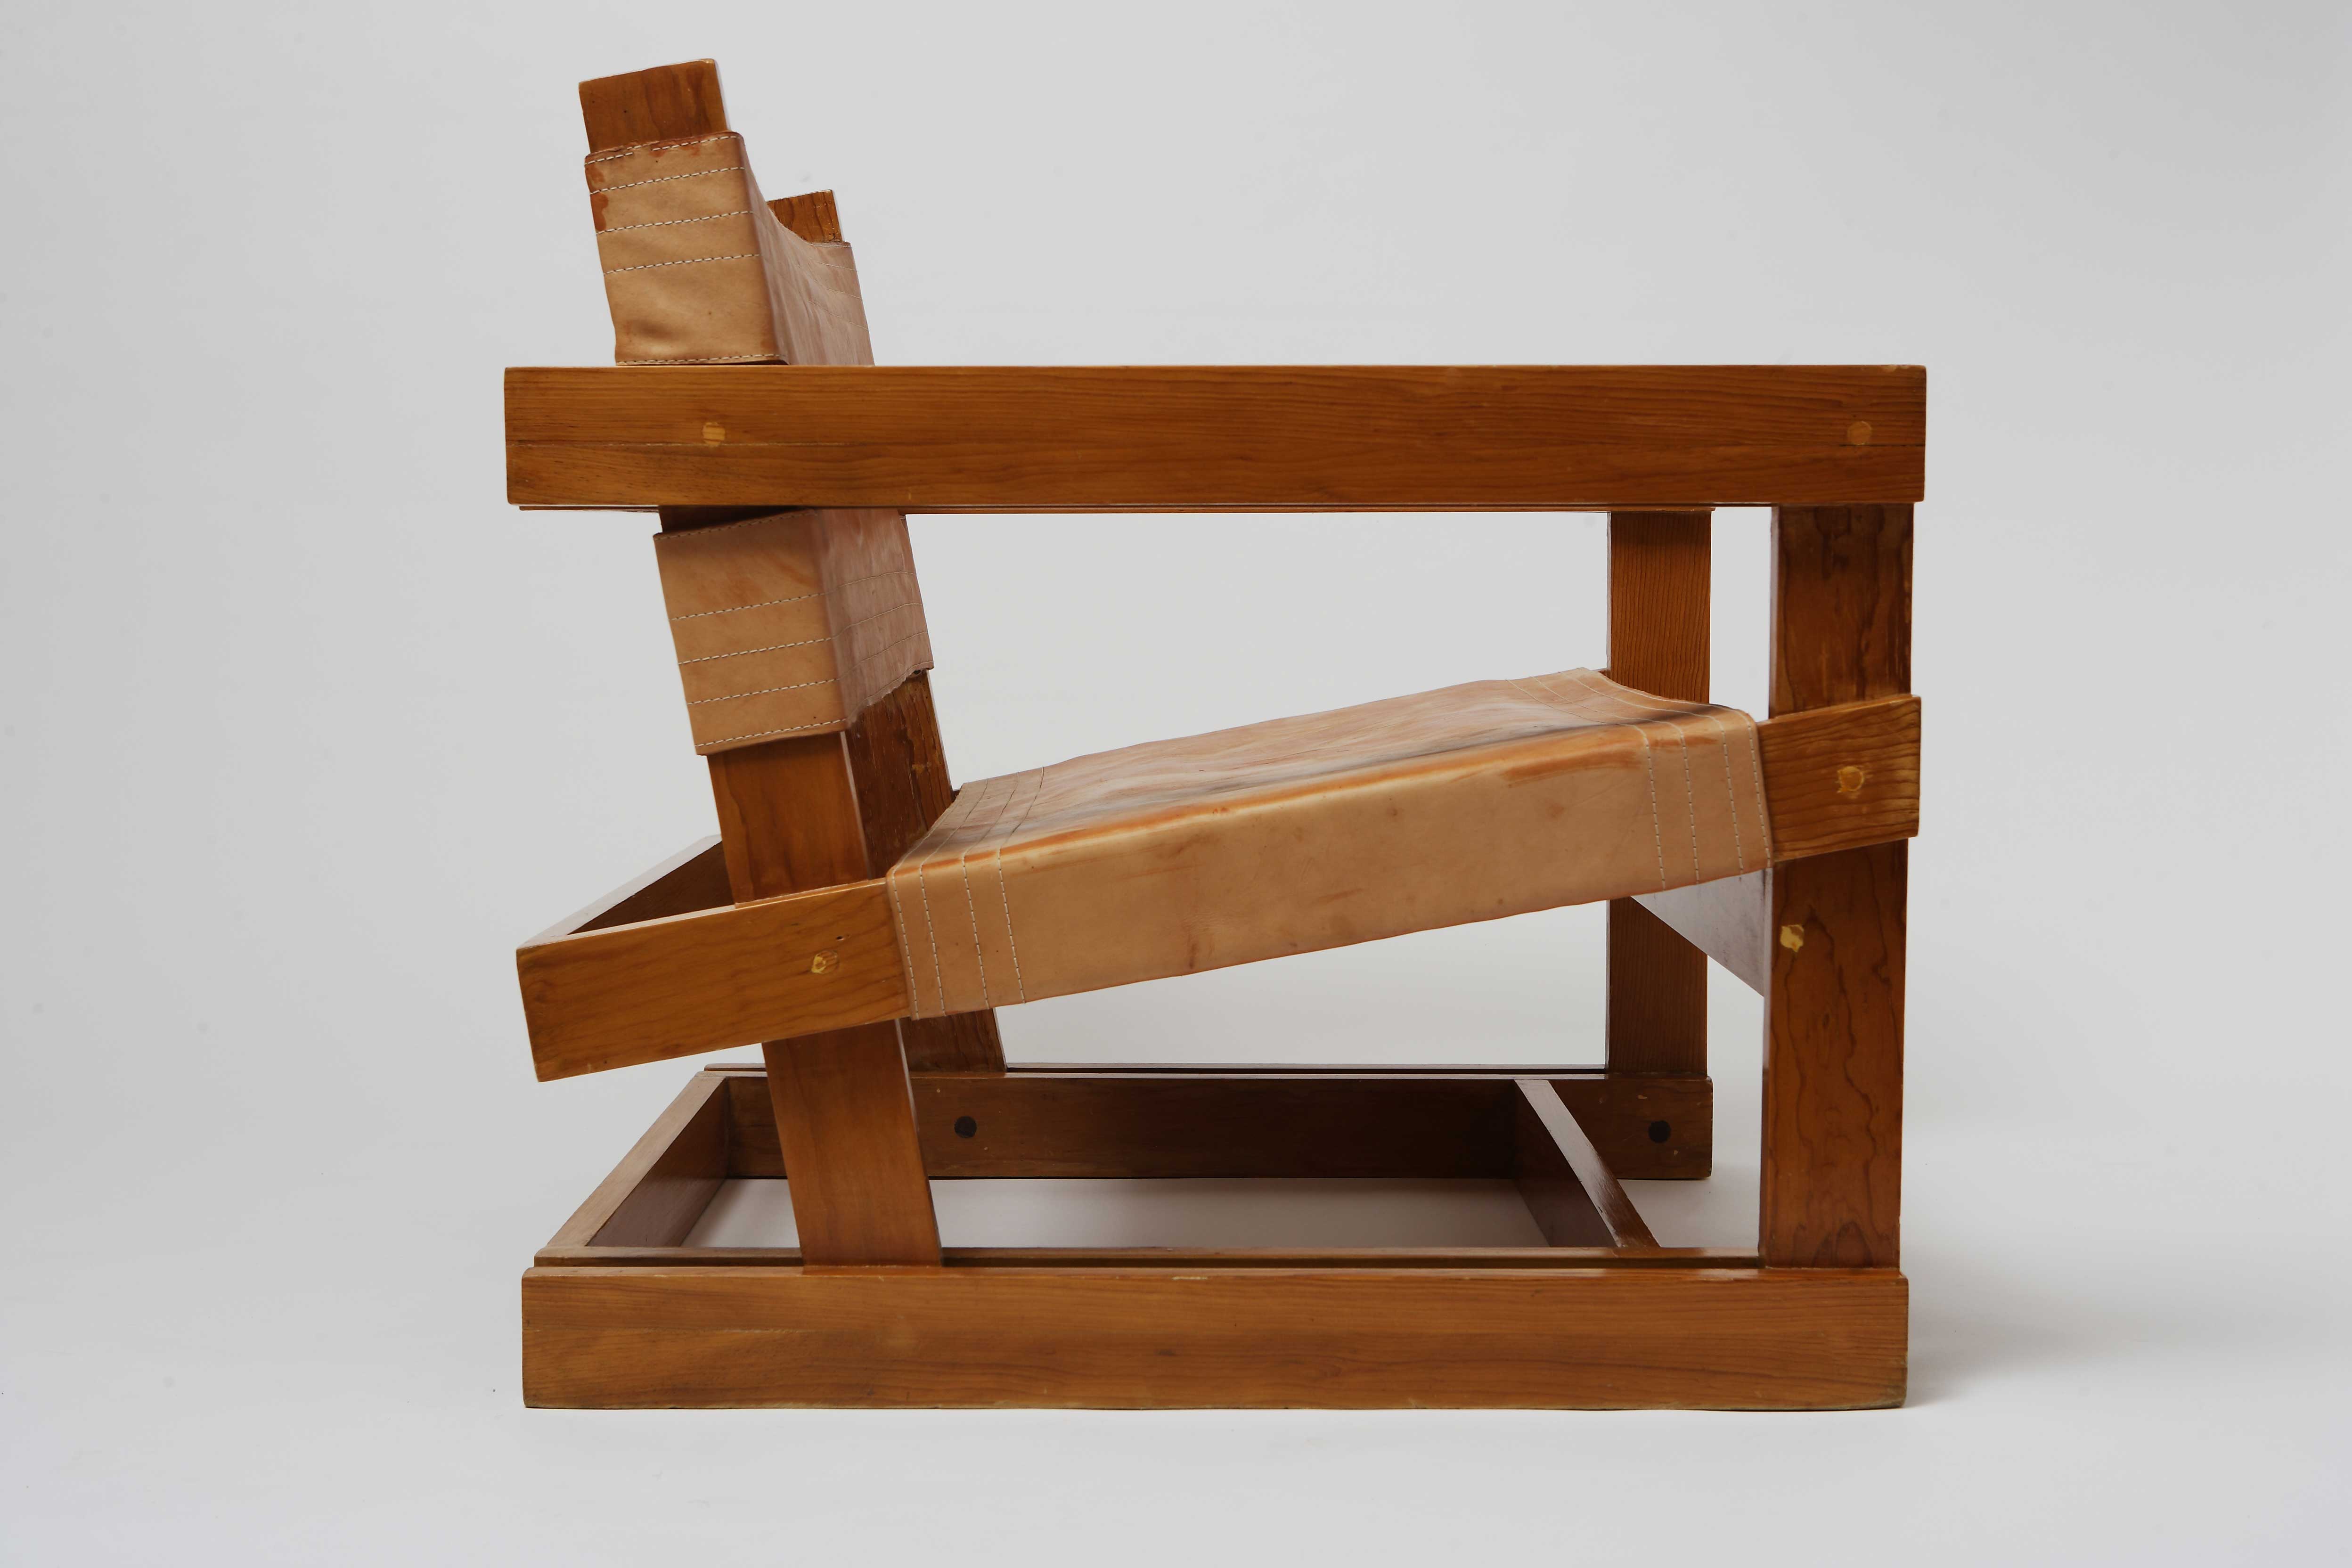 Attolini Chair, pinewood planks and leather seat (1985) (Photo: courtesy)